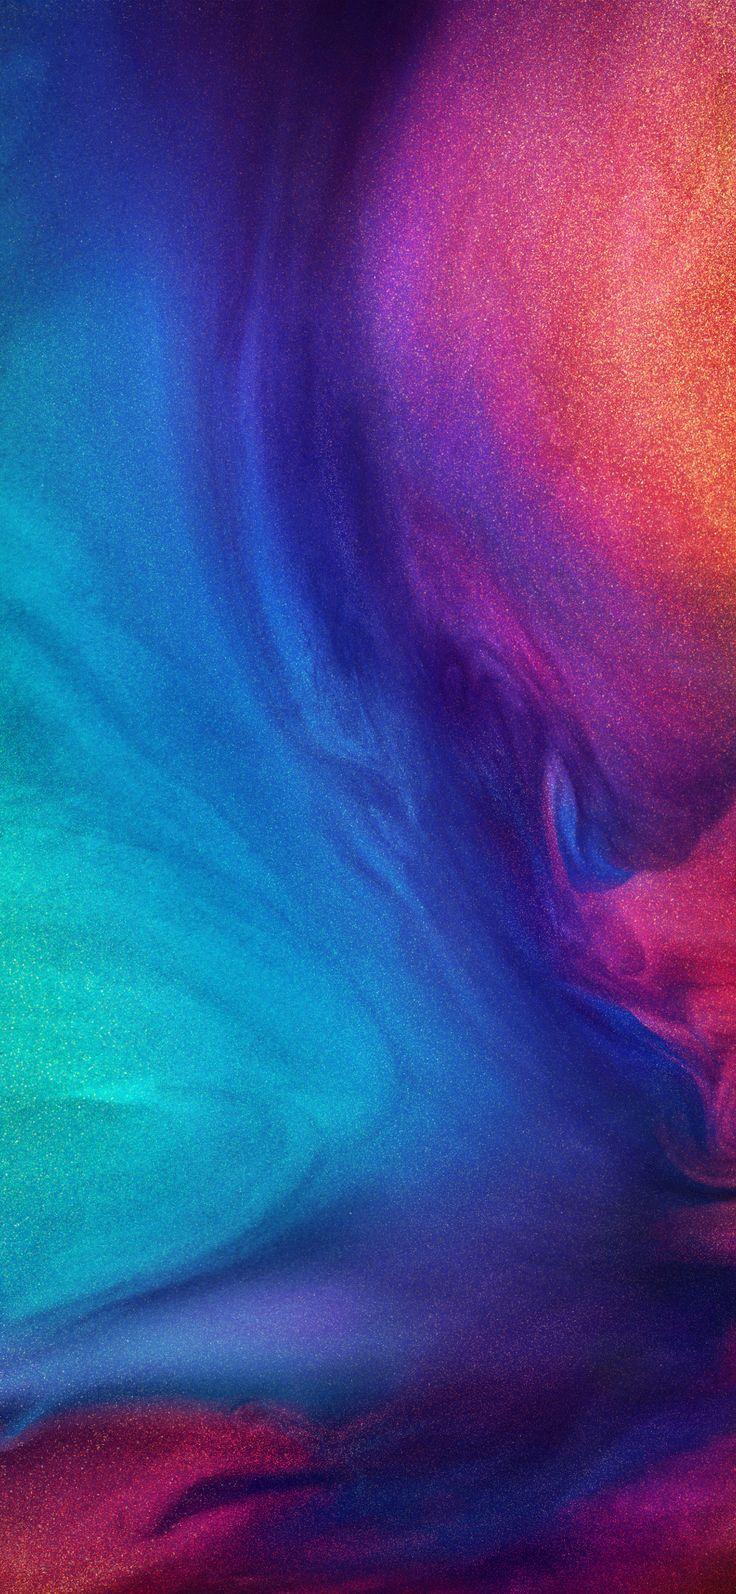 Redmi Note 7 Wallpapers - Top Free Redmi Note 7 Backgrounds ...